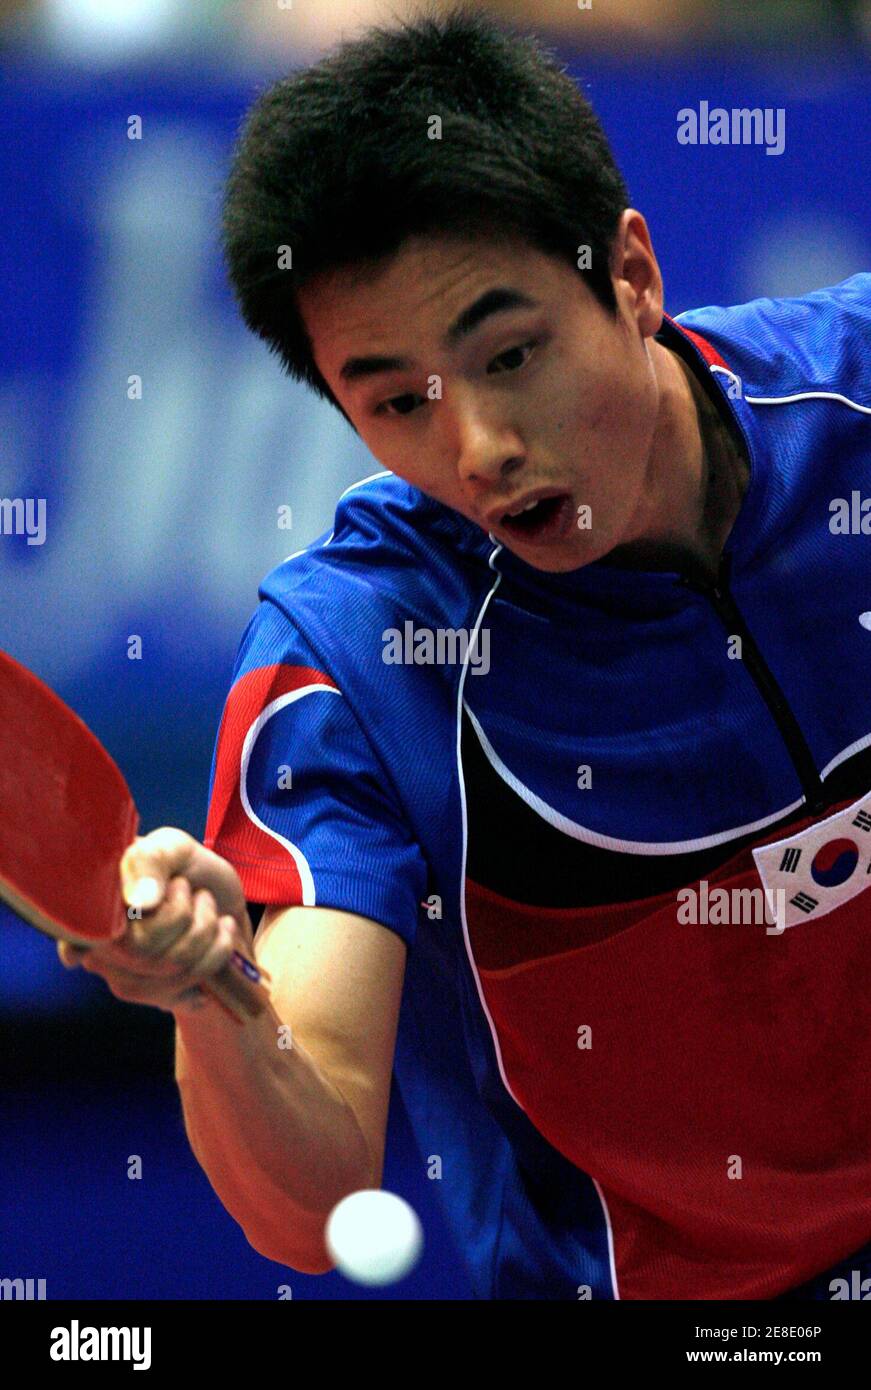 Se Hyuk Joo of South Korea returns a forehand against Long Ma of China  during their men's singles match at the World table tennis championships in  Zagreb May 25, 2007. REUTERS/Nikola Solic (